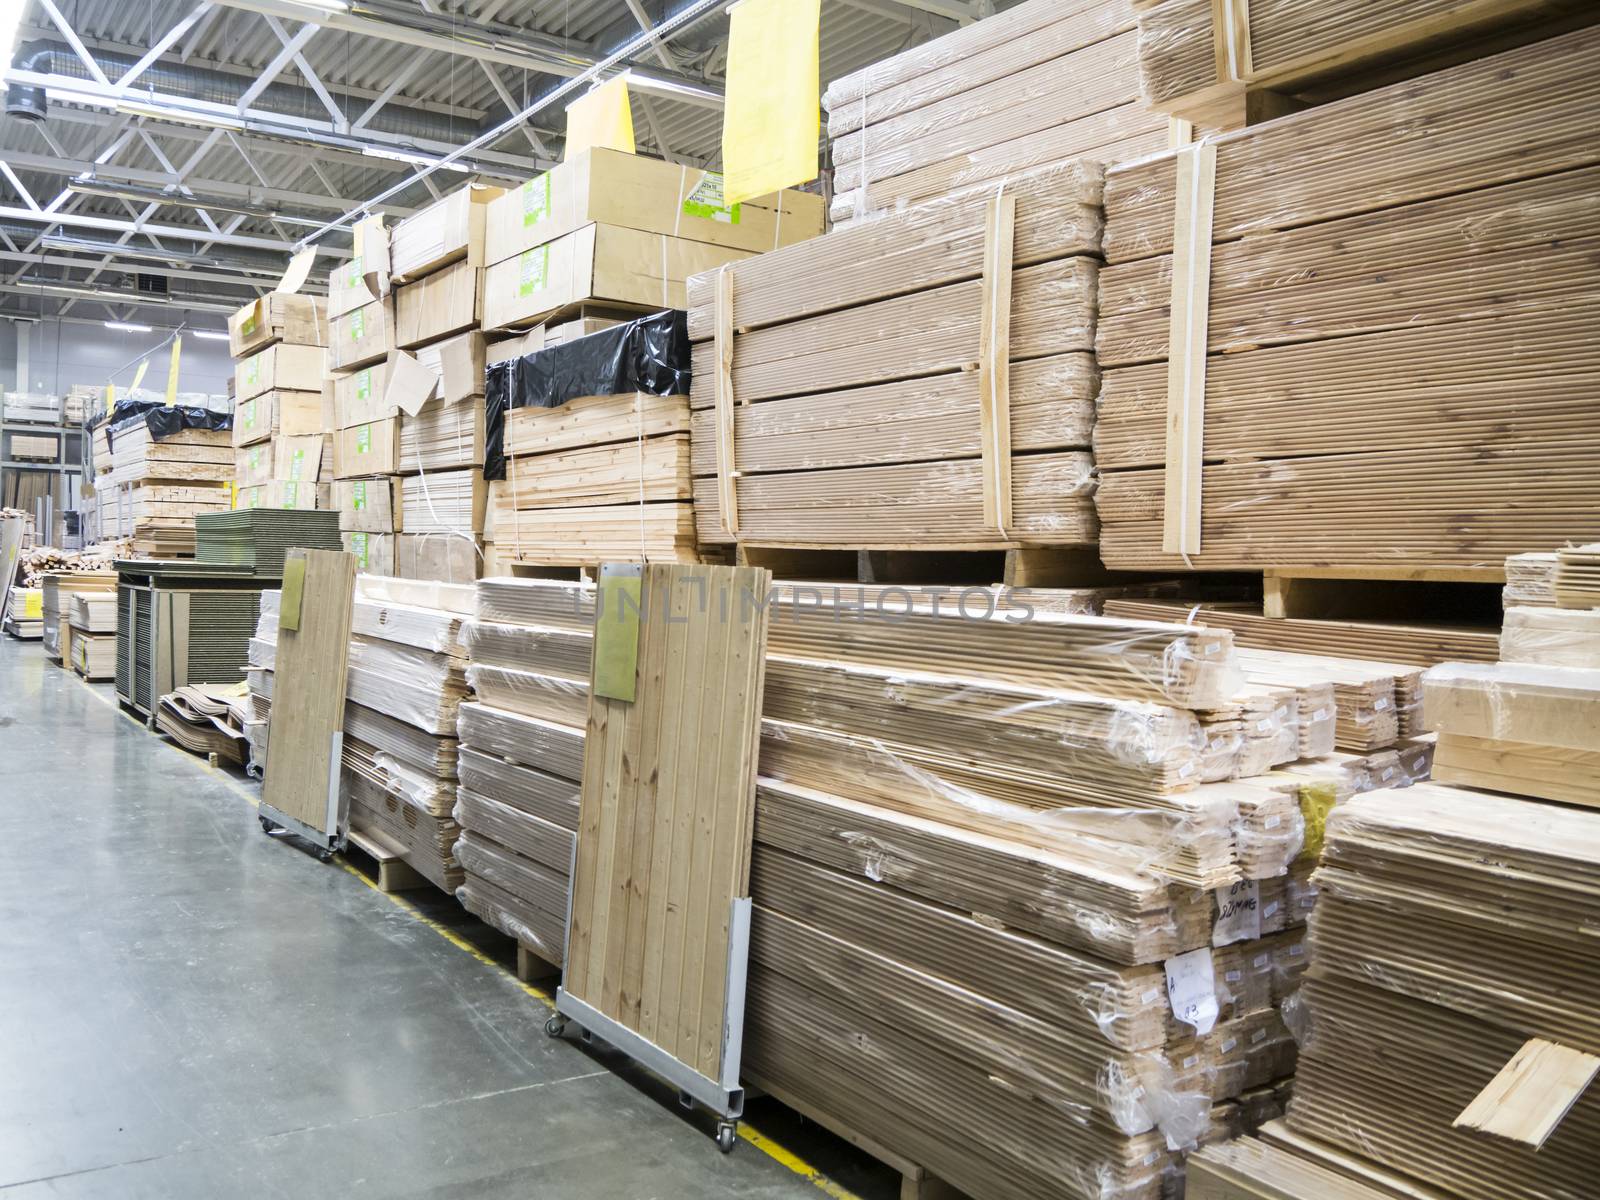 Large furniture warehouse of industial store. Warehouse of building materials shop